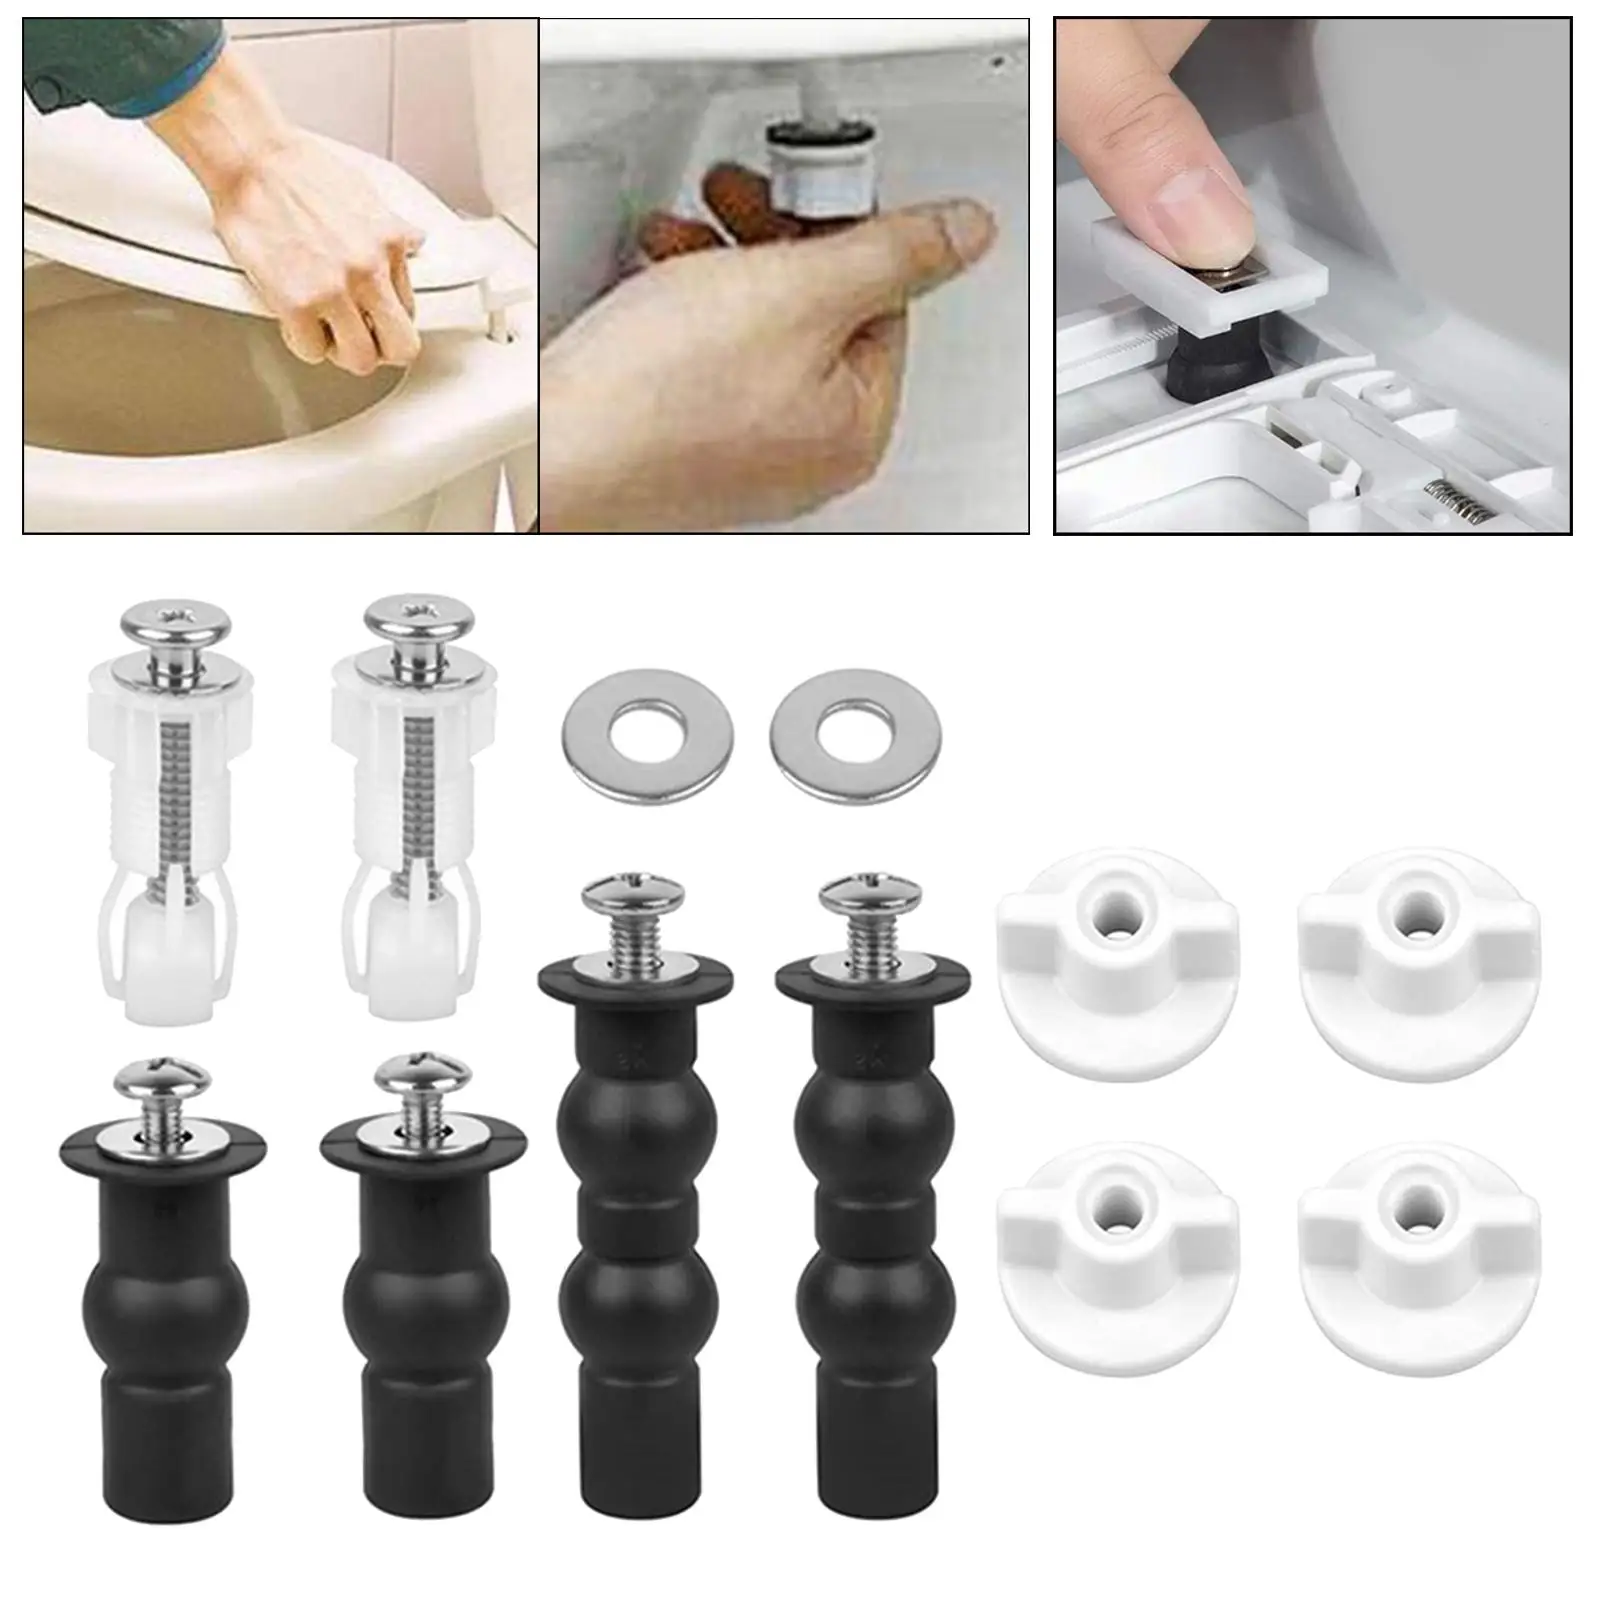 Universal Screw Toilet Toilet Seat Screws Rubber Spreader Bolts Toilet Parts Replacement Toilet Seat Screws 304 Stainless Steel